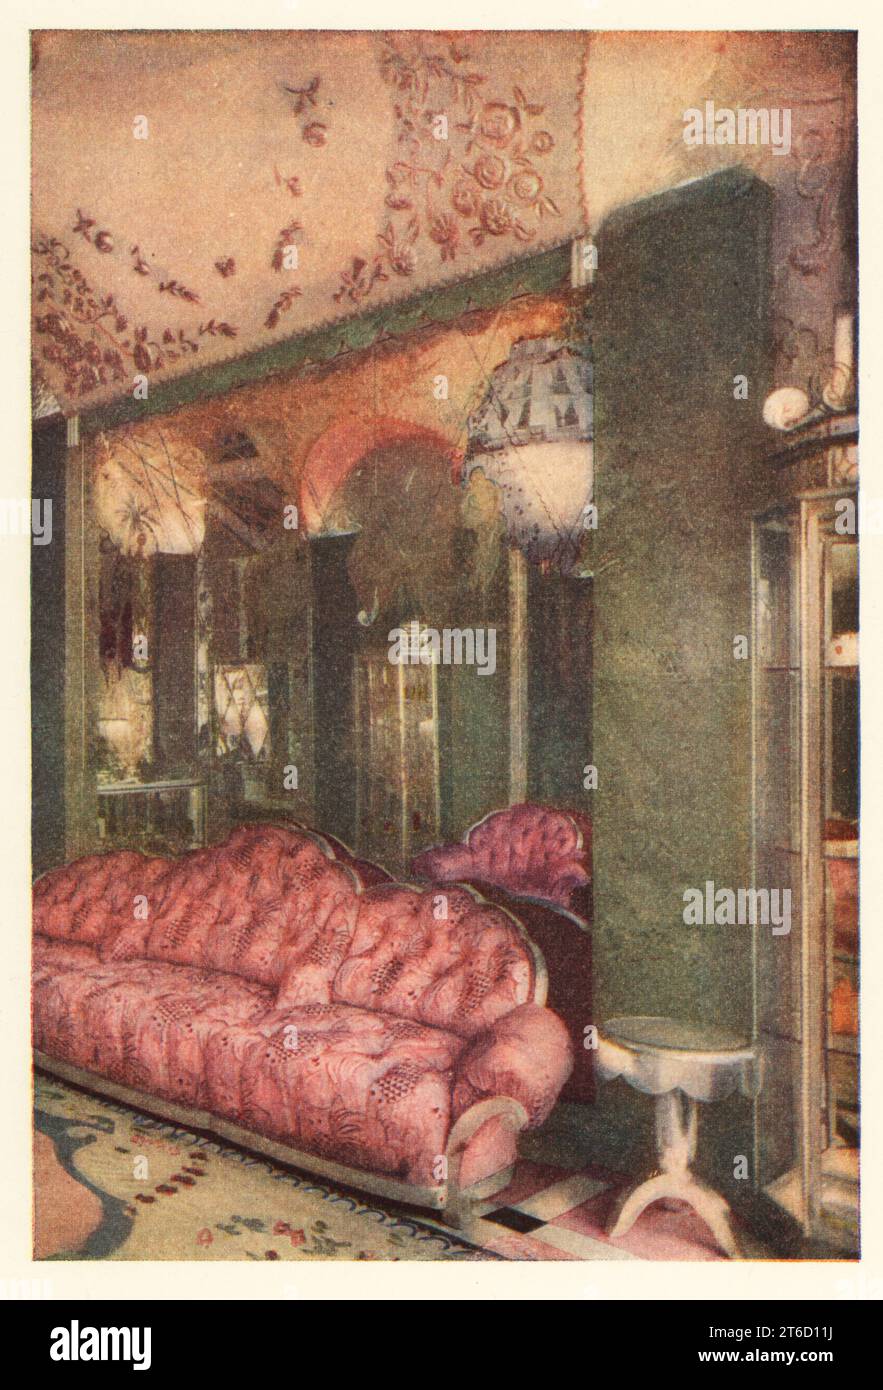 Art Deco interior of the Richard Hudnut shop, rue de la Paix, Paris, 1928. A large pink sofa under a mirror, glass chandelier, and pink ceiling. Smithsonian-process colour print from Richard le Galliennes Romance of Perfume, Hudnut, New York, 1928. Stock Photo